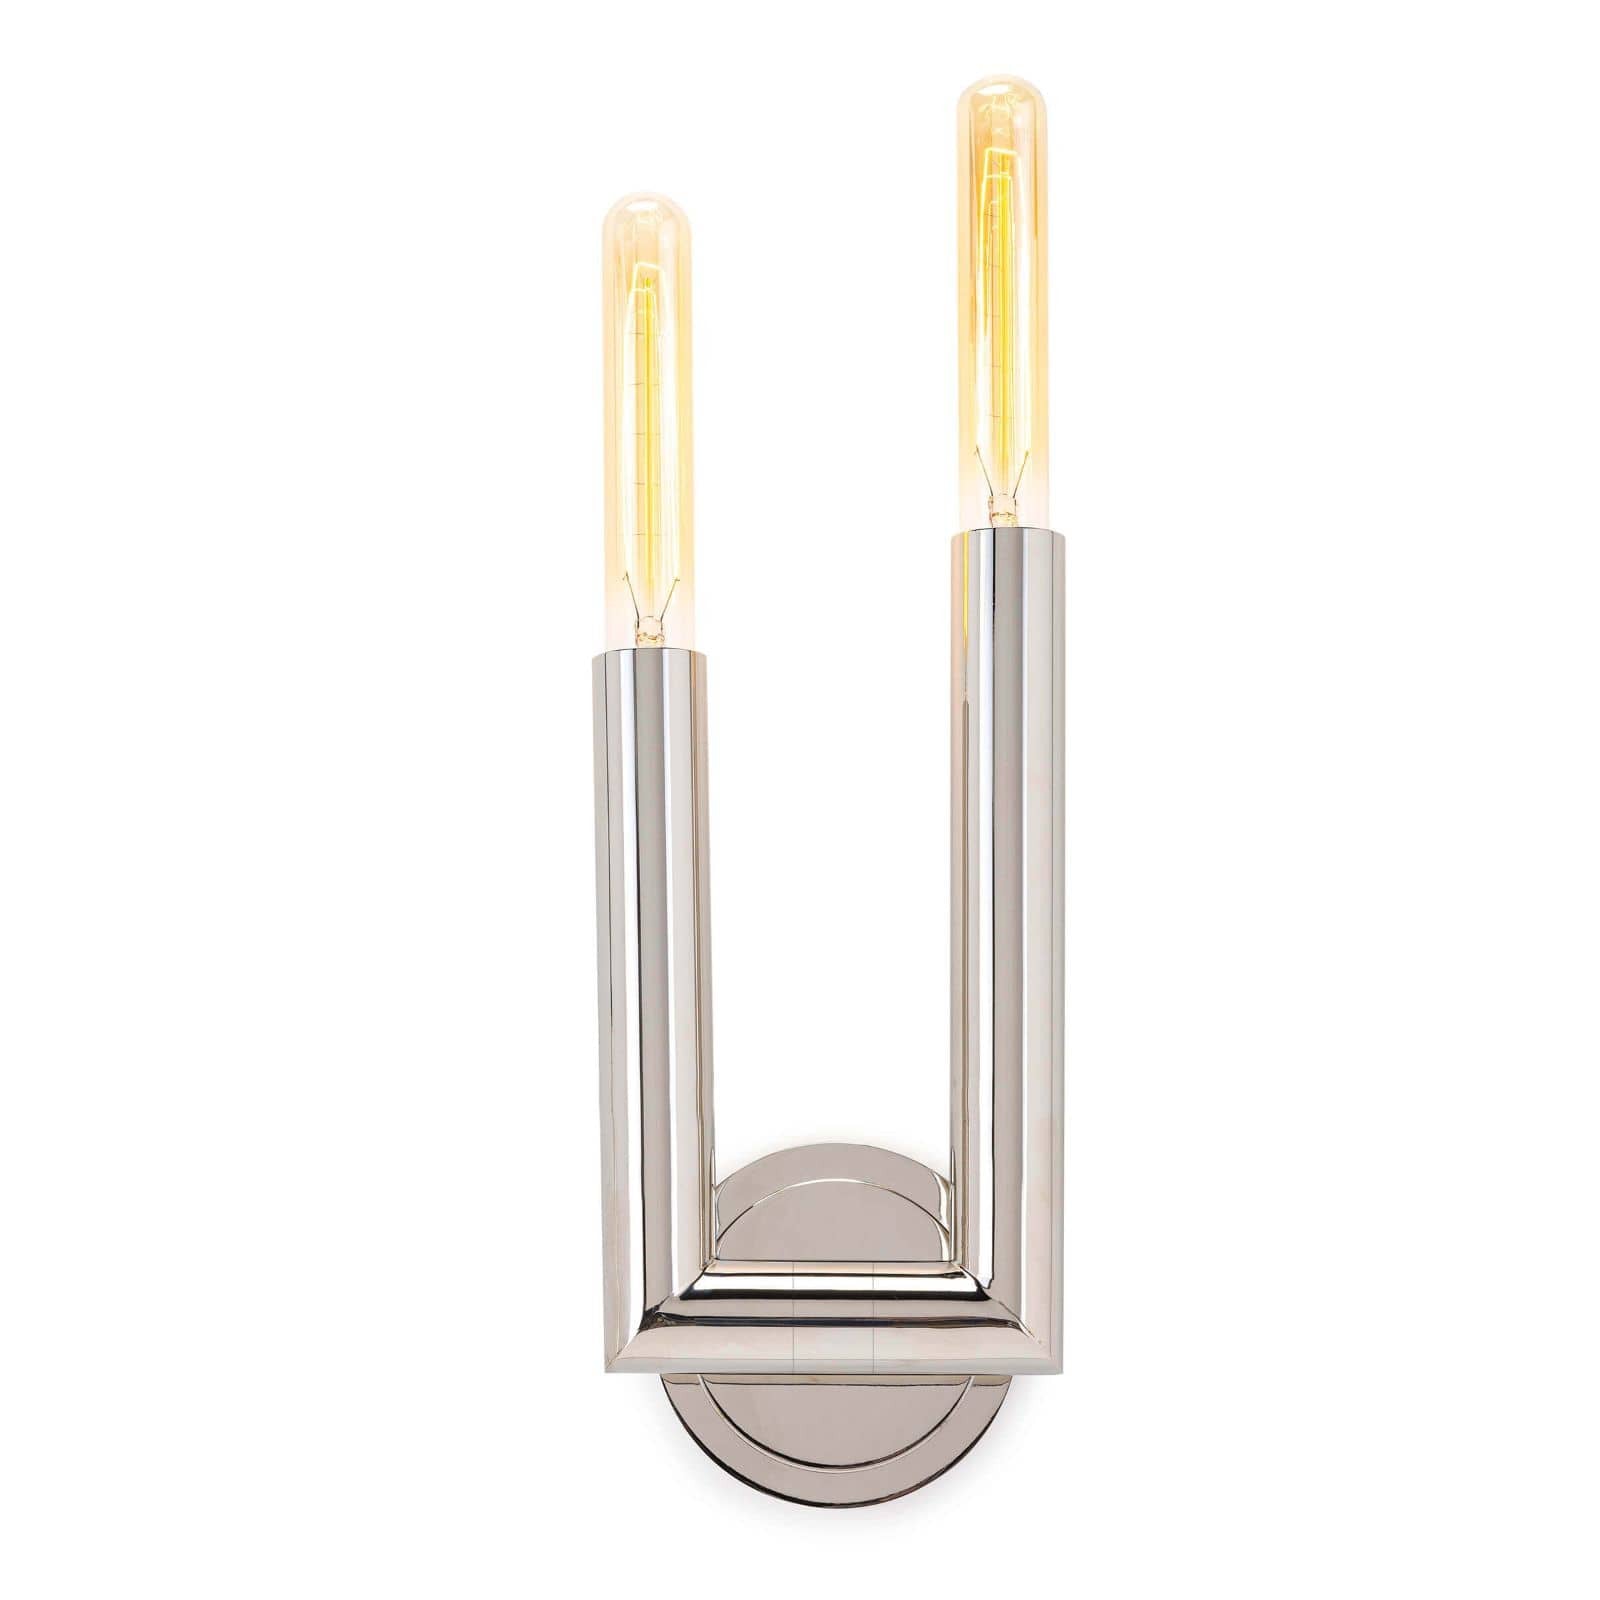 This Wolfe Sconce has clean lines and a simple form. We love that the shape can adjust to match the space --  a beautiful sconce to line down the hallway, place next to your bedroom, or another space!    Overall Dimensions: 6"w x 3"d x 13"h